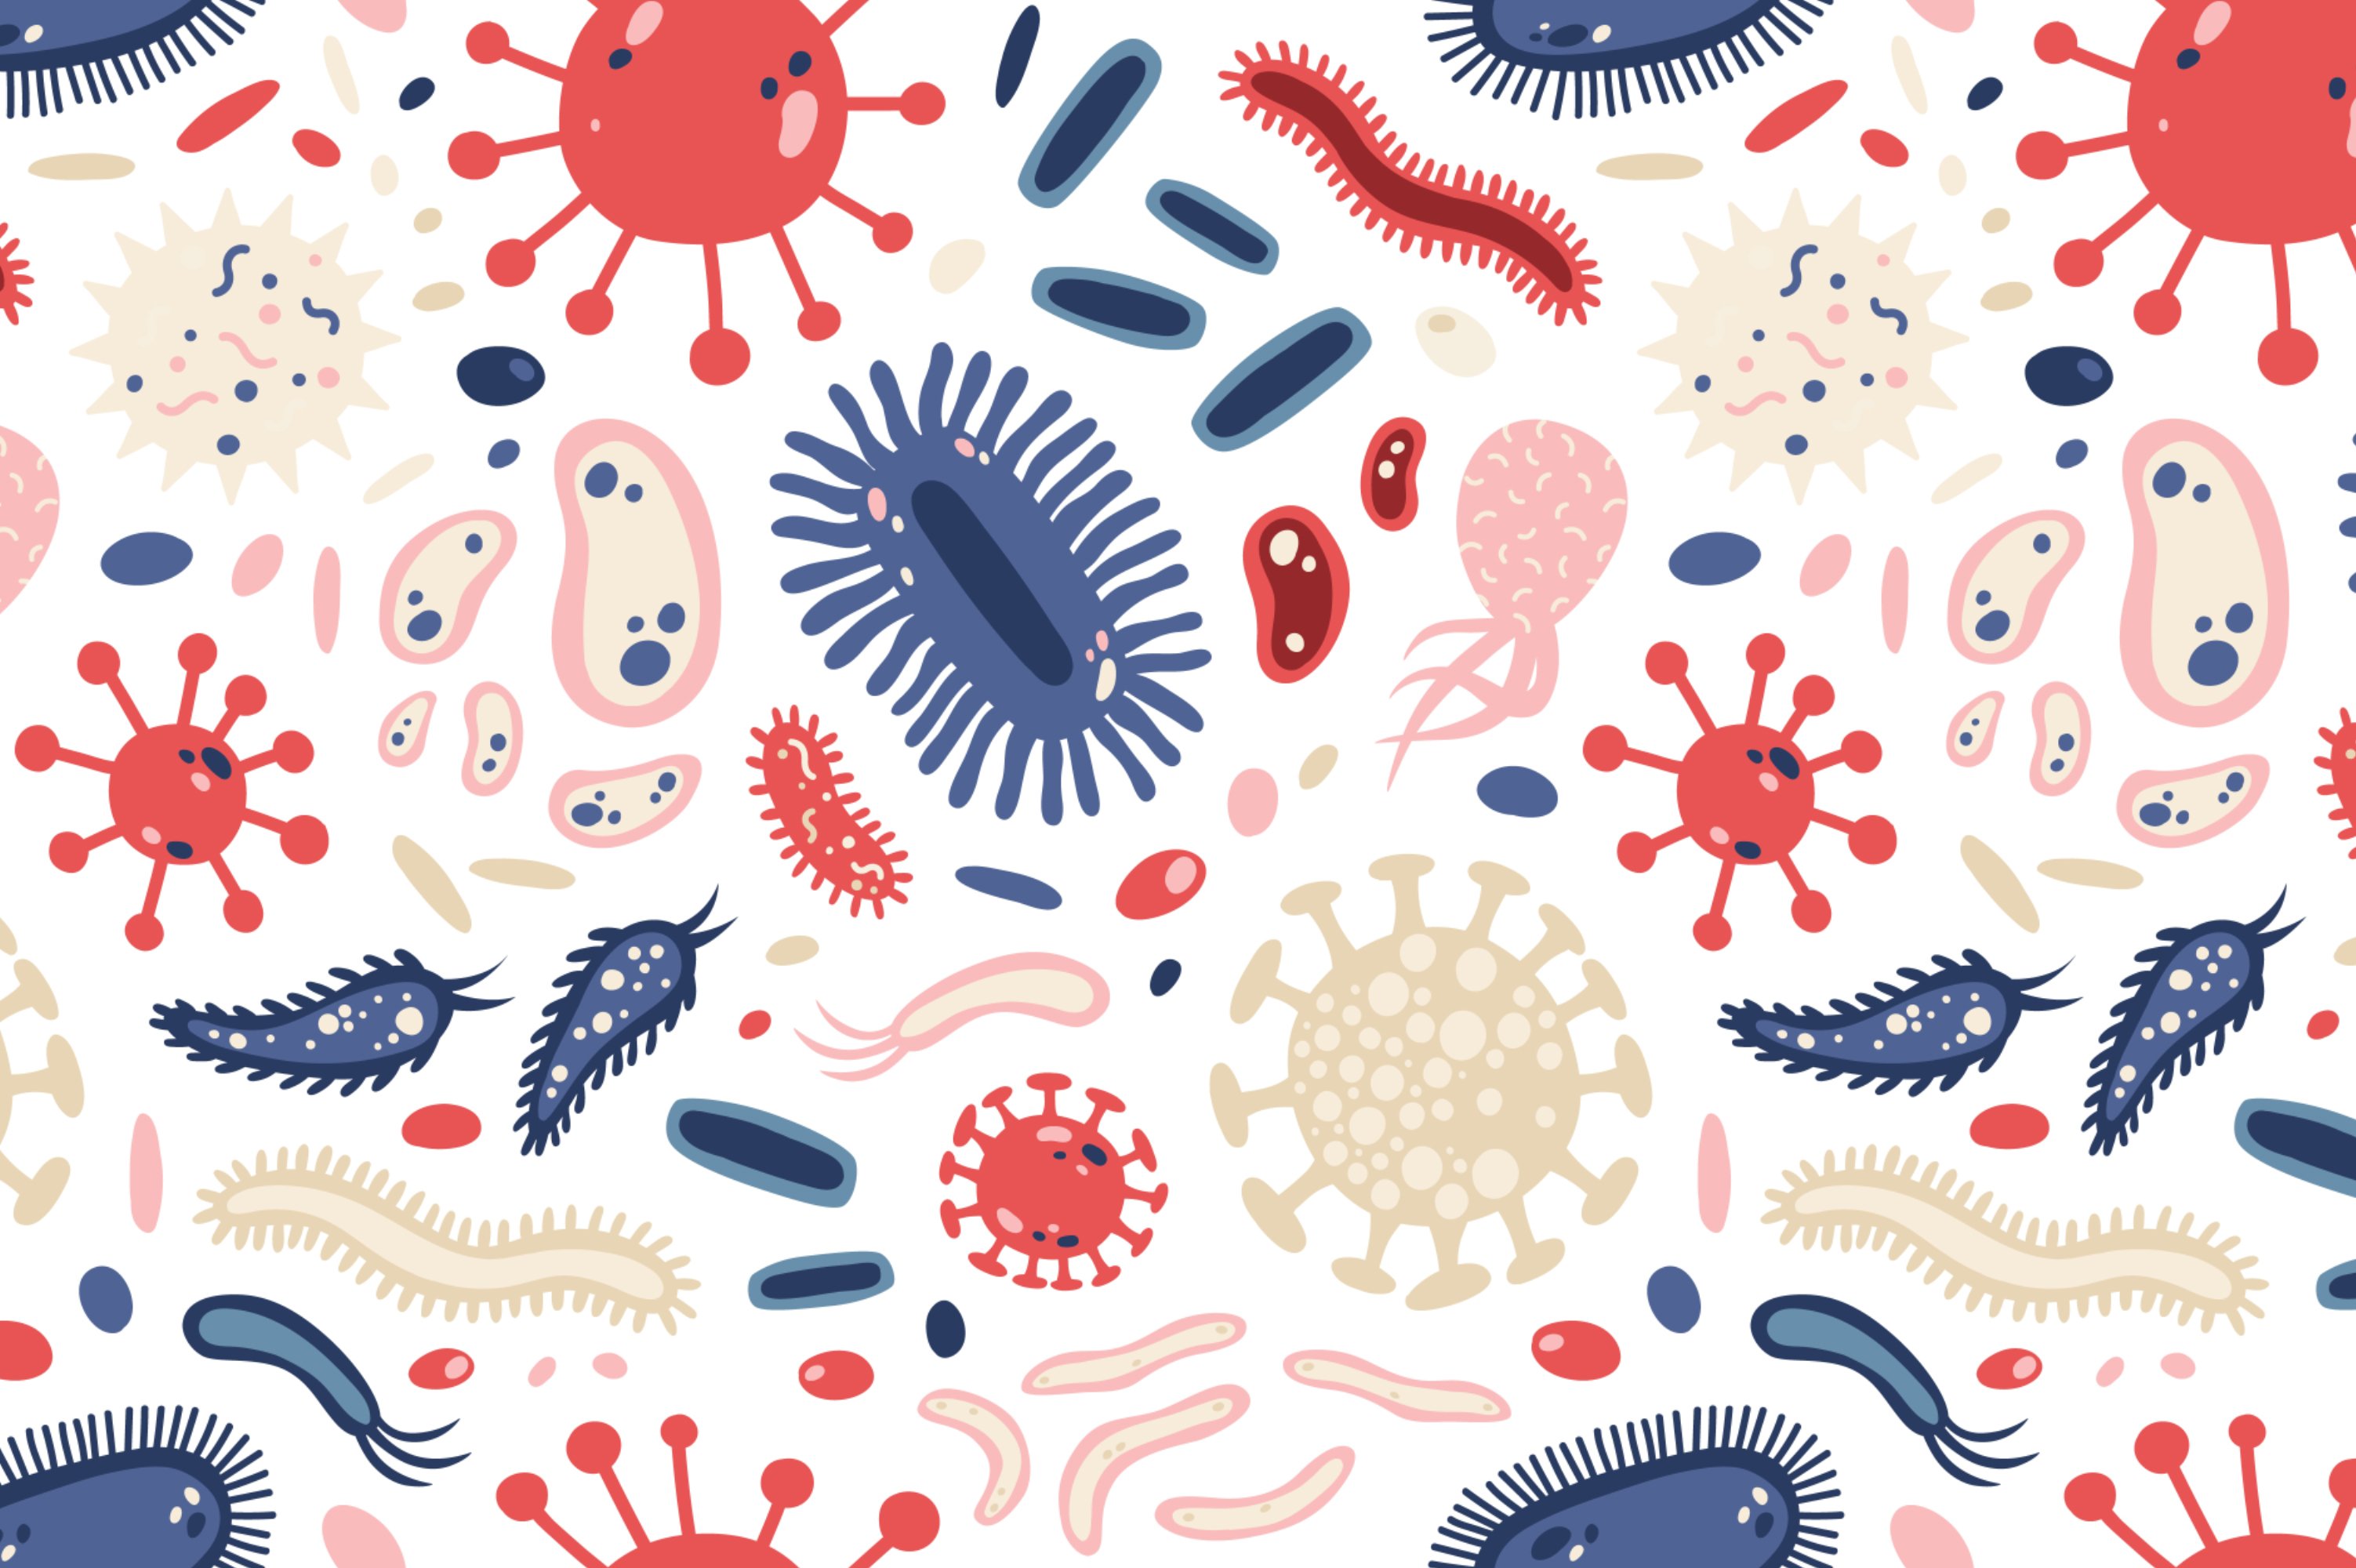 doodle microbes 6 689